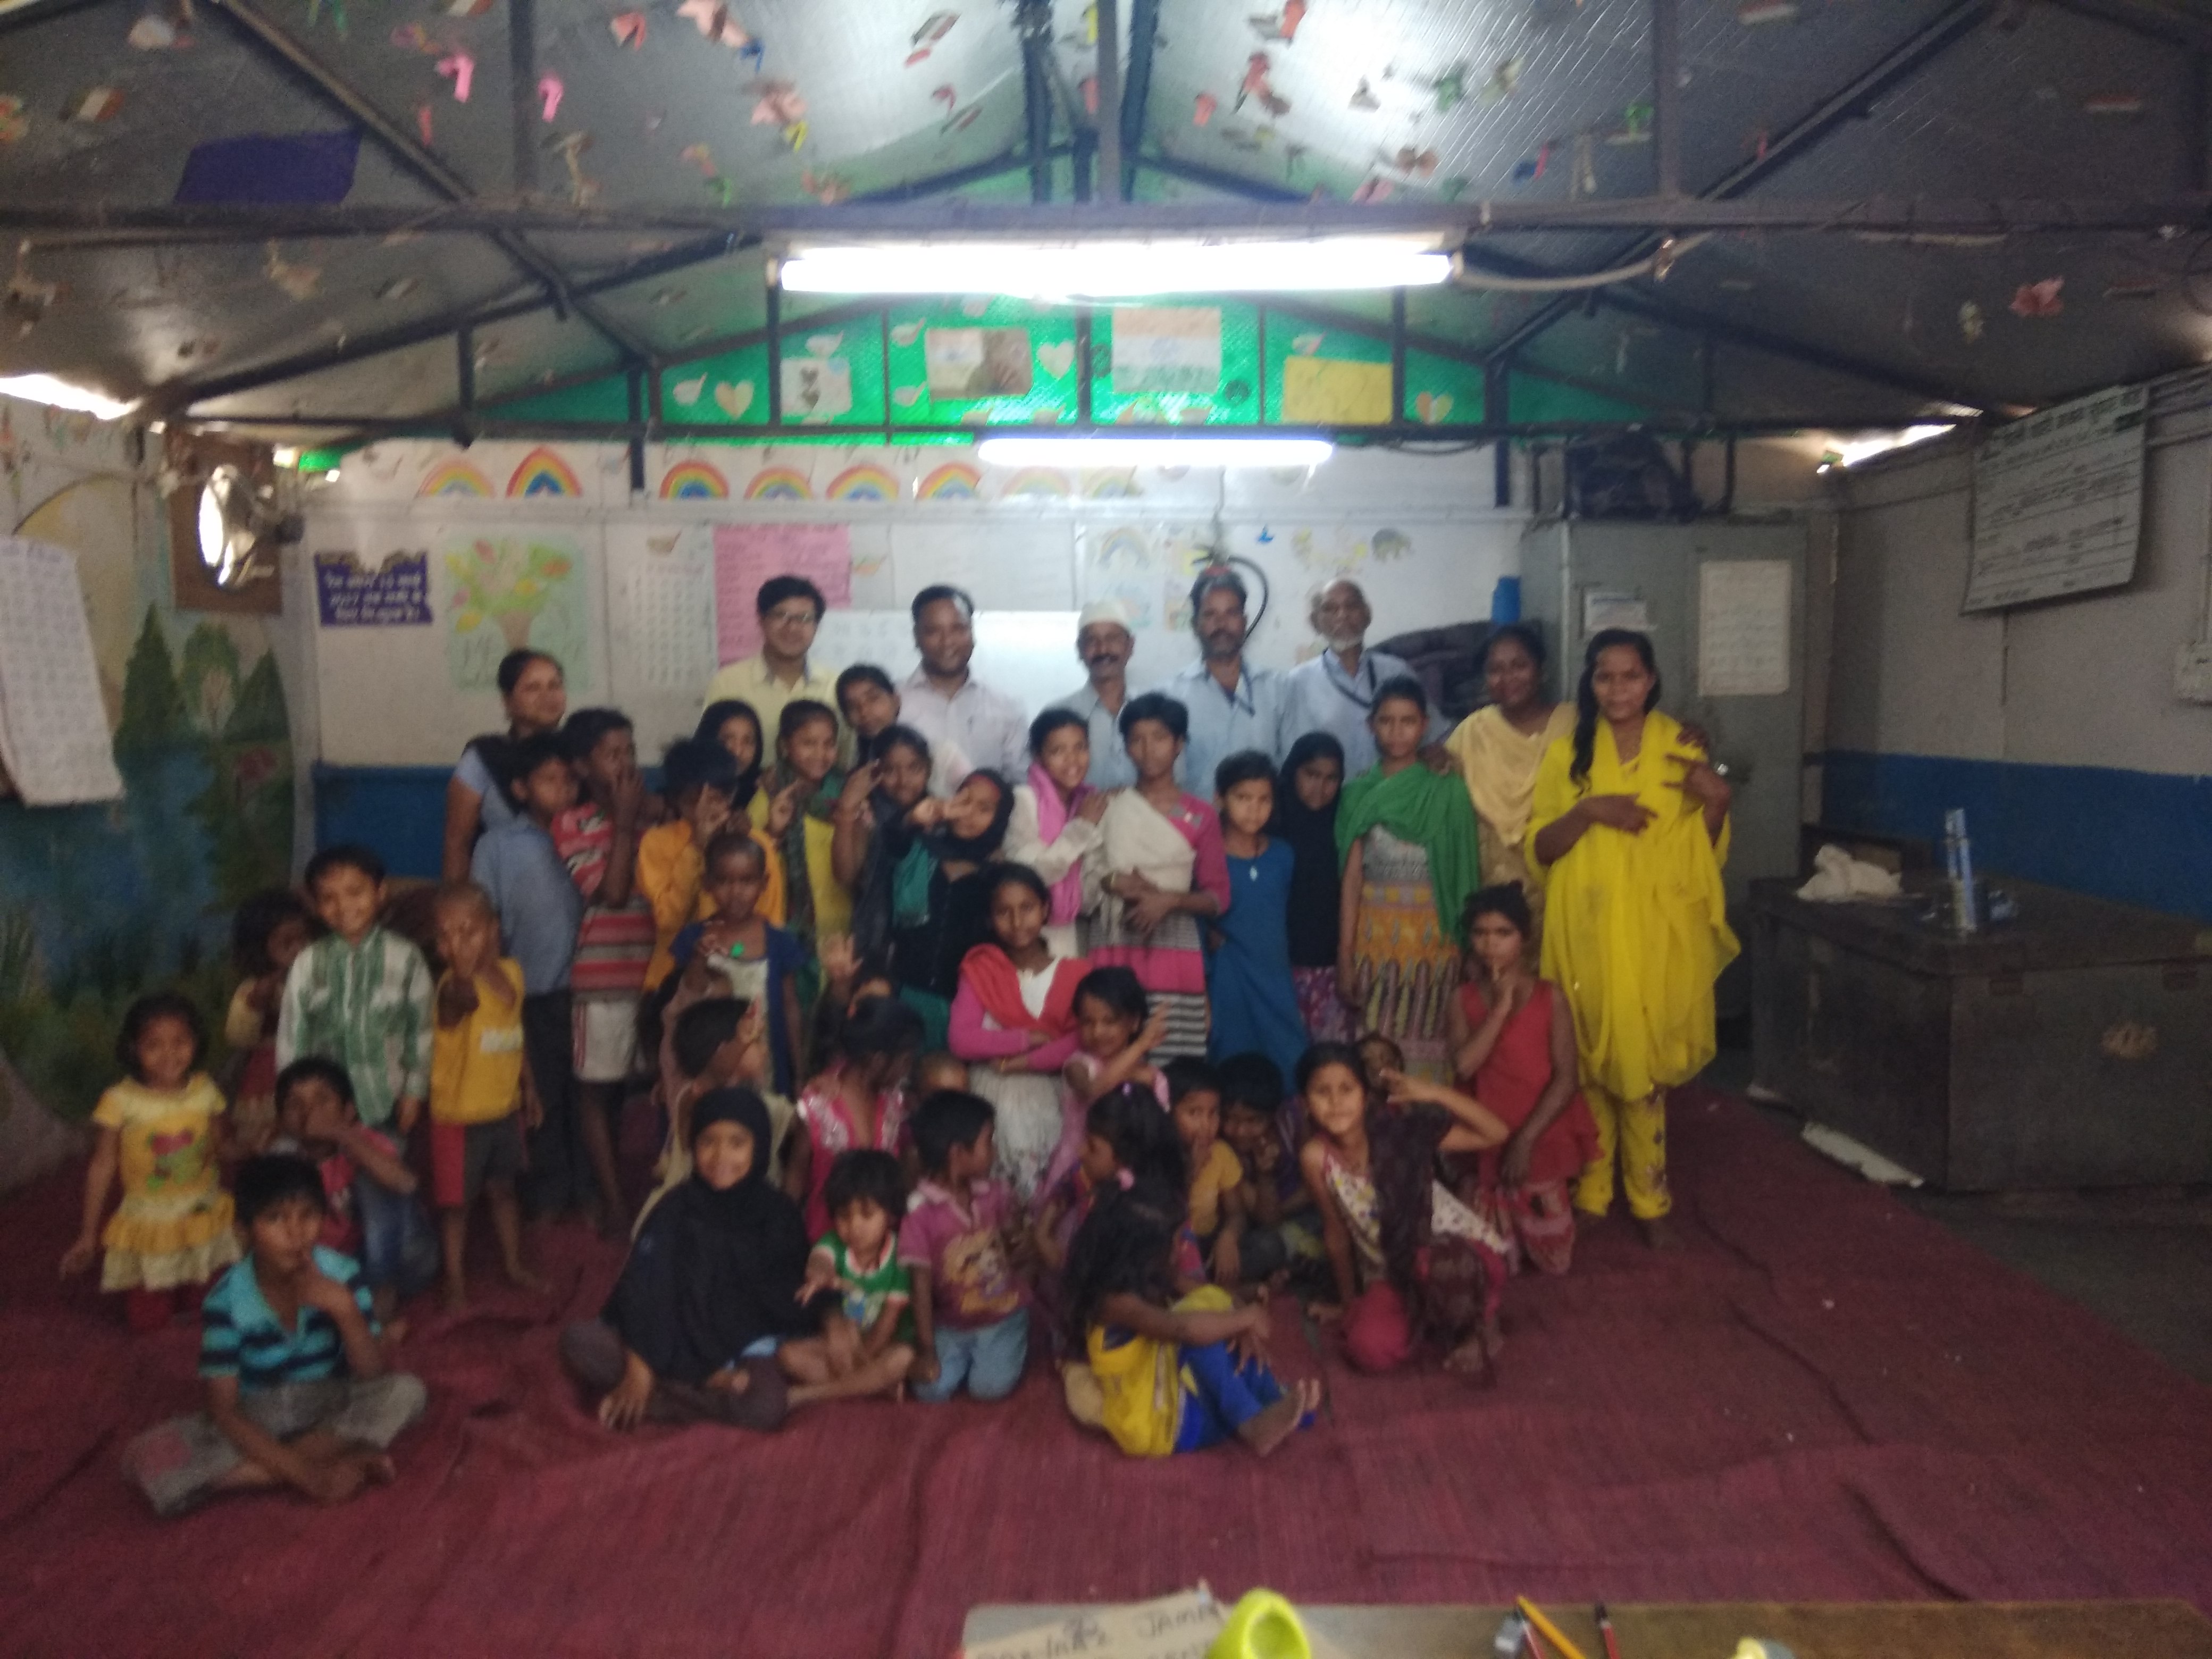 DLSA South East organized by Shelter Home and Night Shelter on 25.03.2018